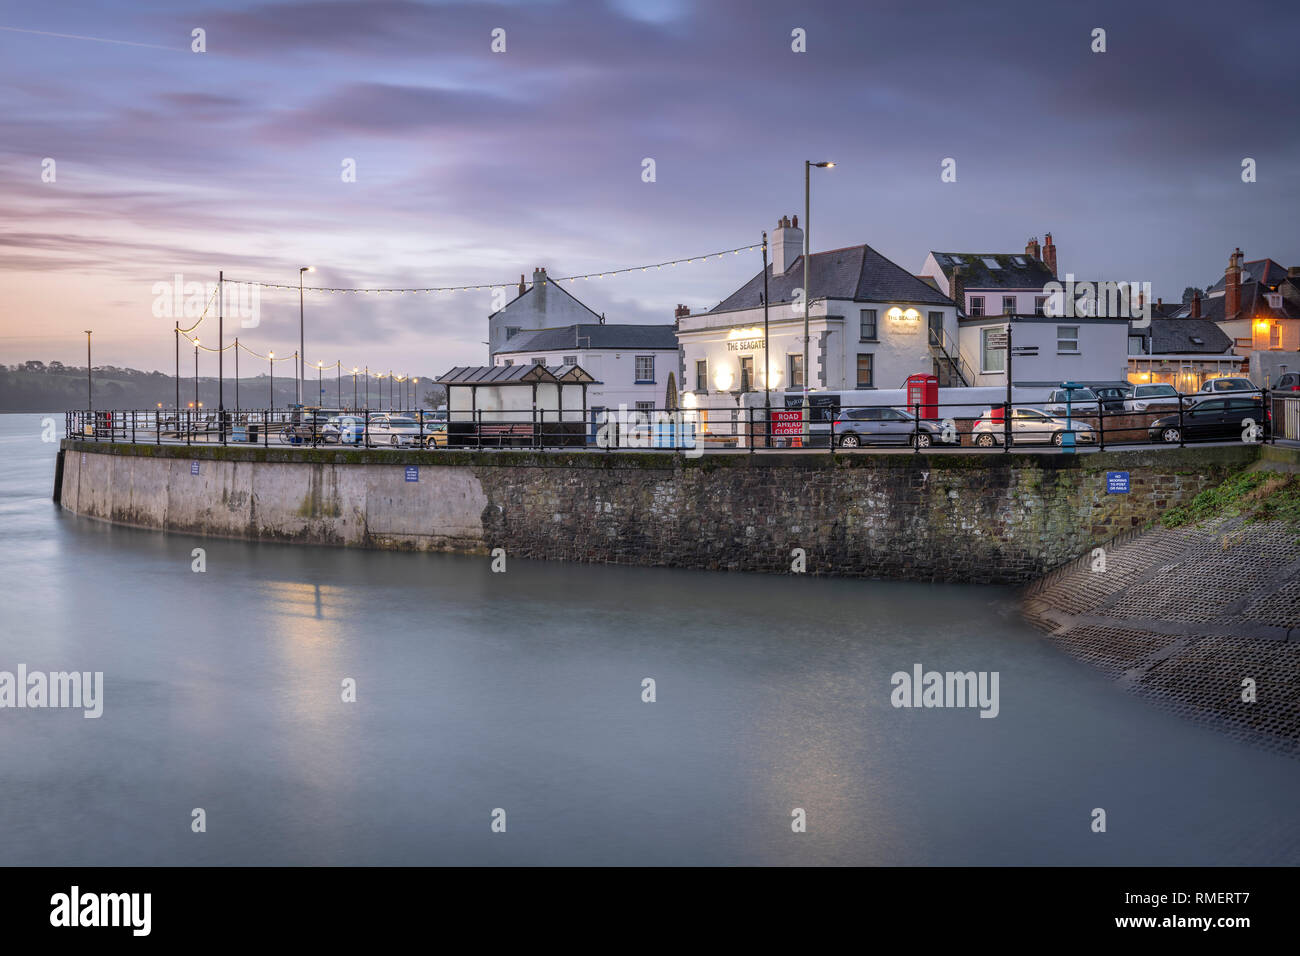 The ever popular Seagate on the quayside at Appledore in North Devon. Stock Photo